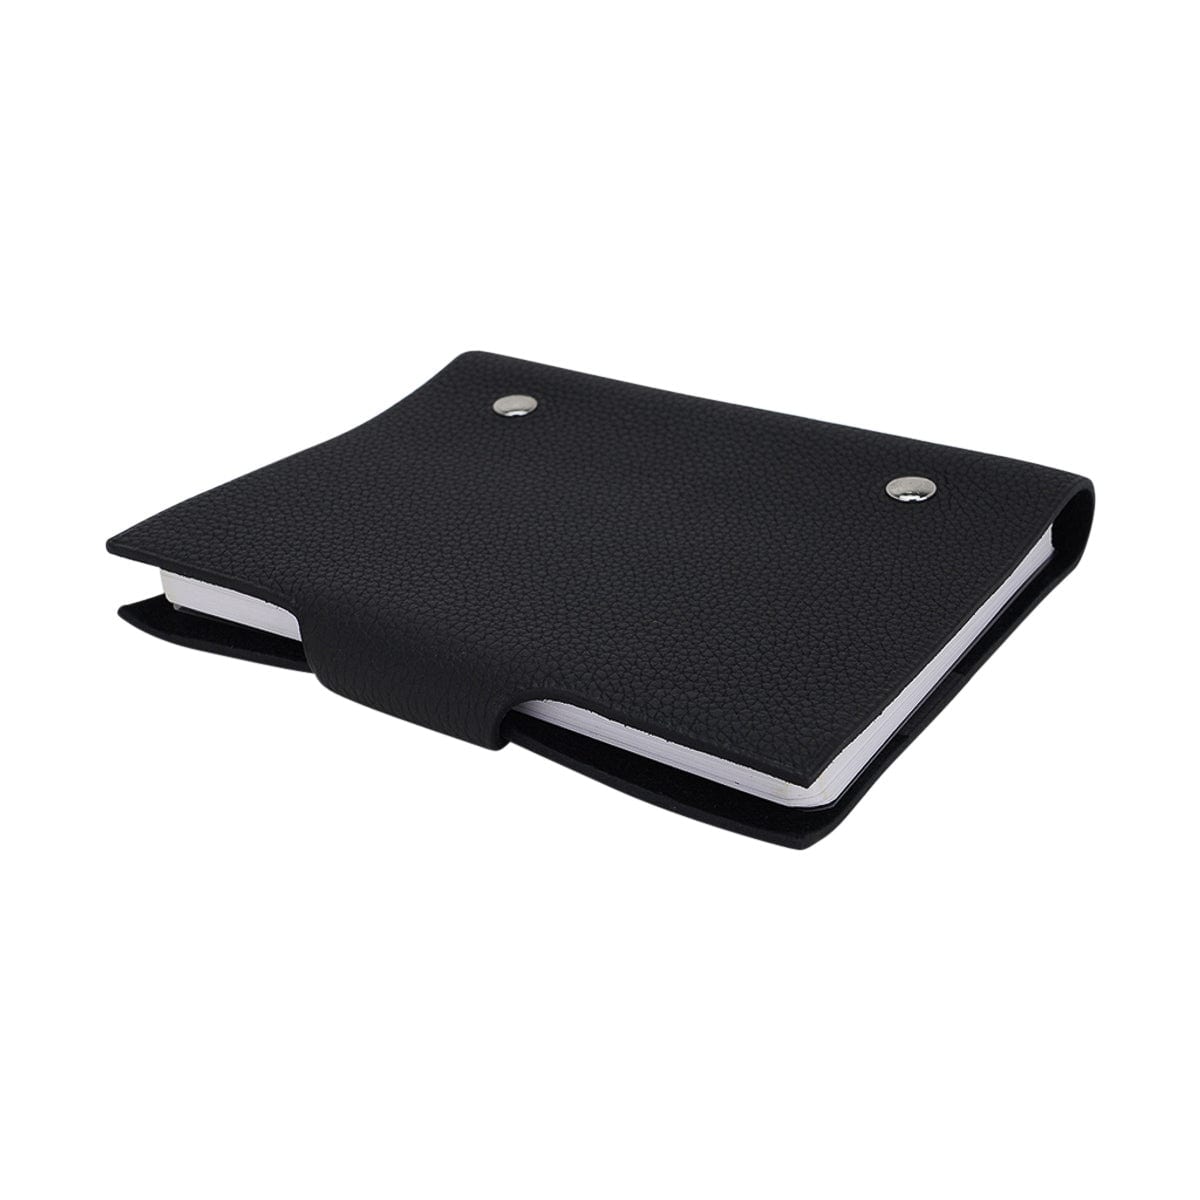 Hermes Ulysse Notebook Cover Black PM Model with Refill